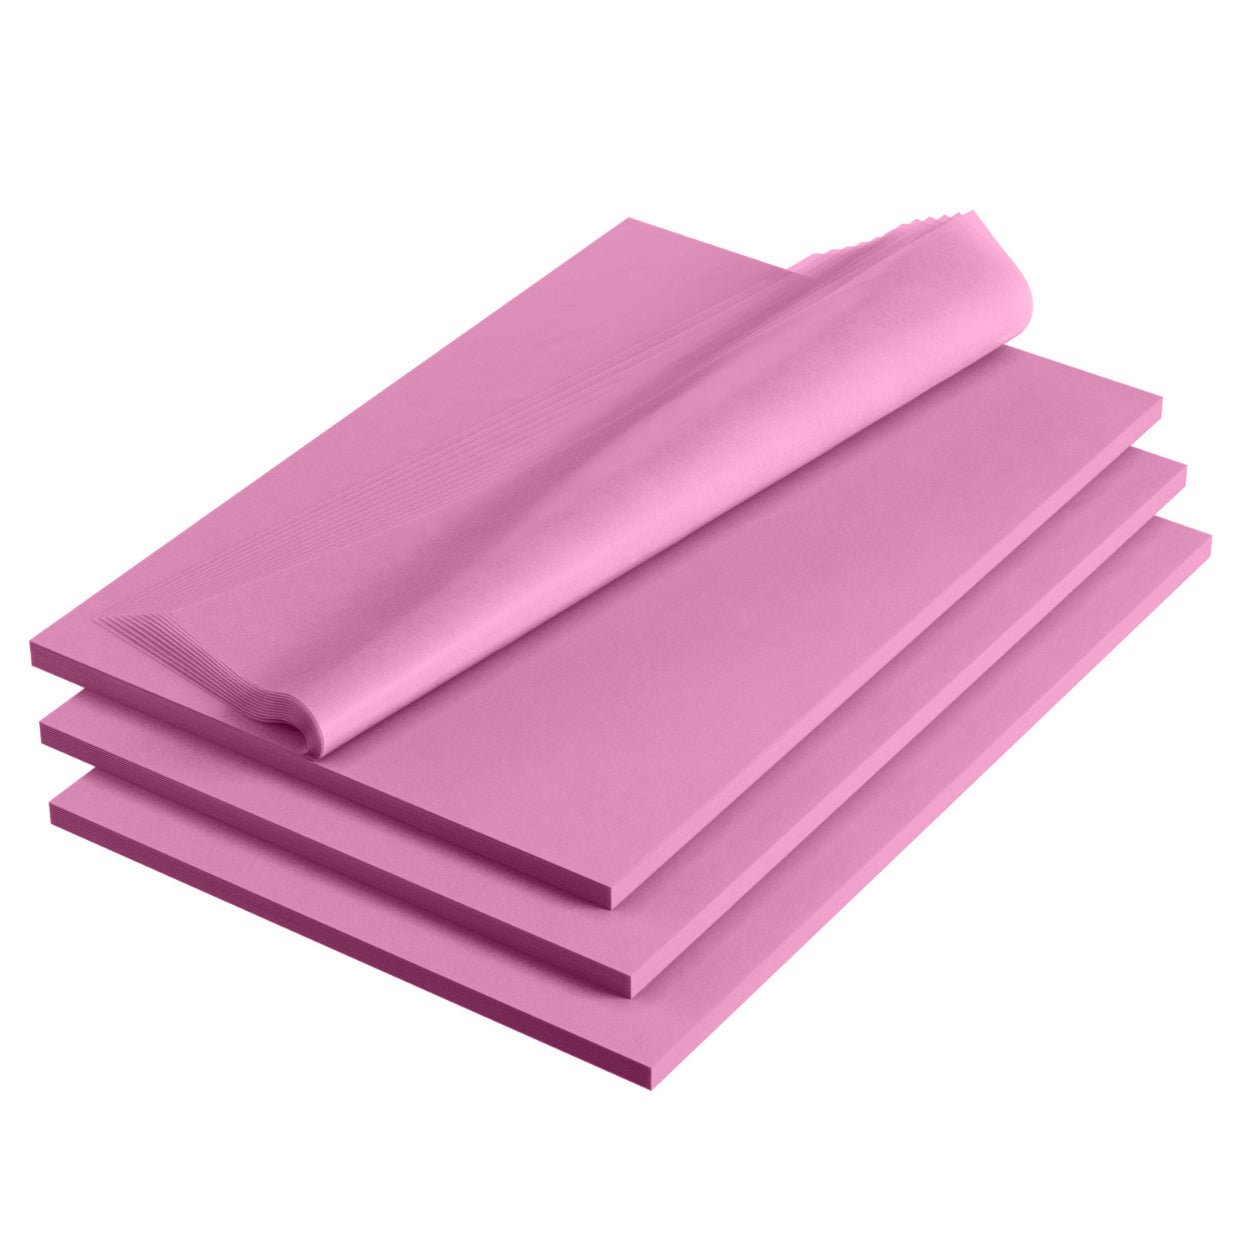 Bulk Tissue Paper Ream Violet 20in x 30in Sheets - 480 count